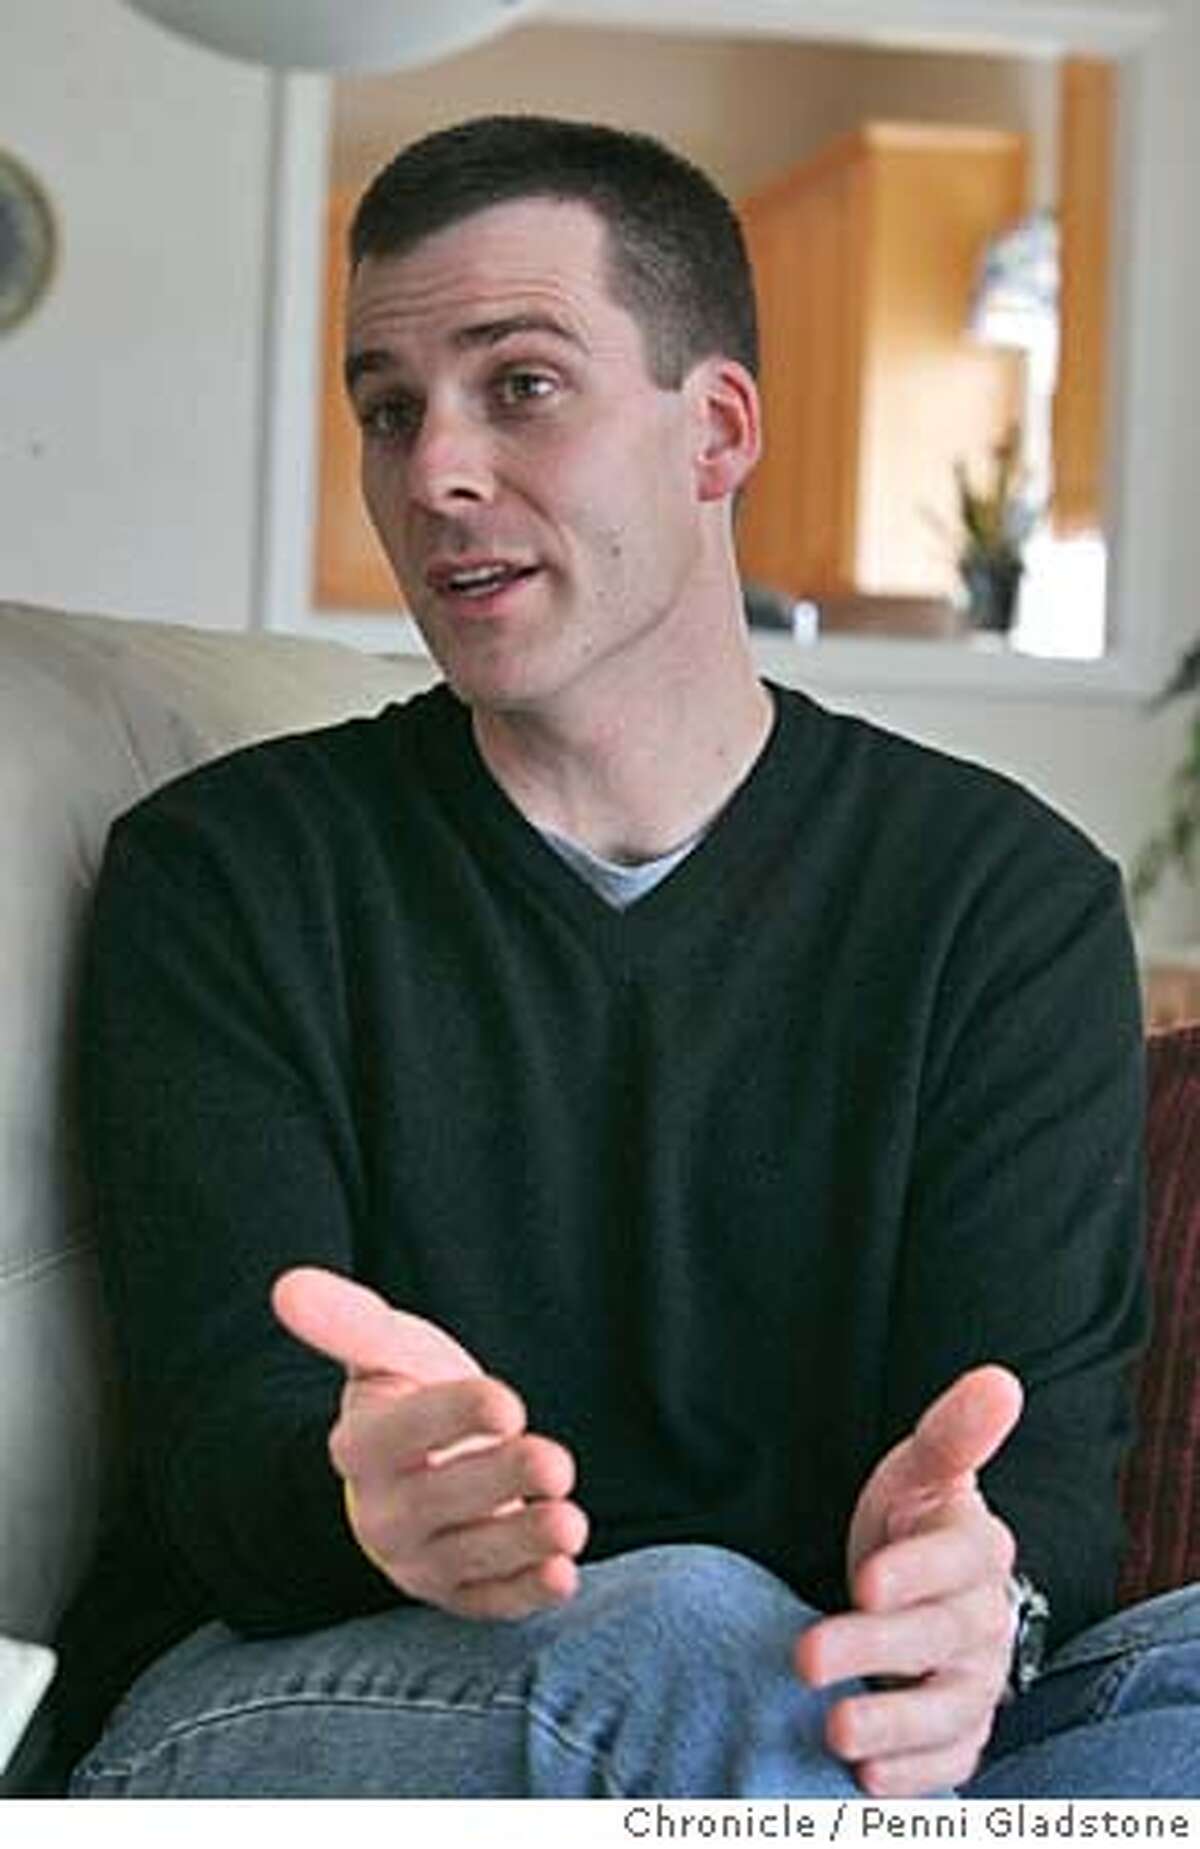 PETERSONXX041PG.JPG interview with jury foreman Steve Cardosi at home. The Peterson reporters are attempting to put together a tic toc of jury deliberations for later in the week. The San Francisco Chronicle, Penni Gladstone Photo taken on 12/15/04, in Half Moon Bay, CA.